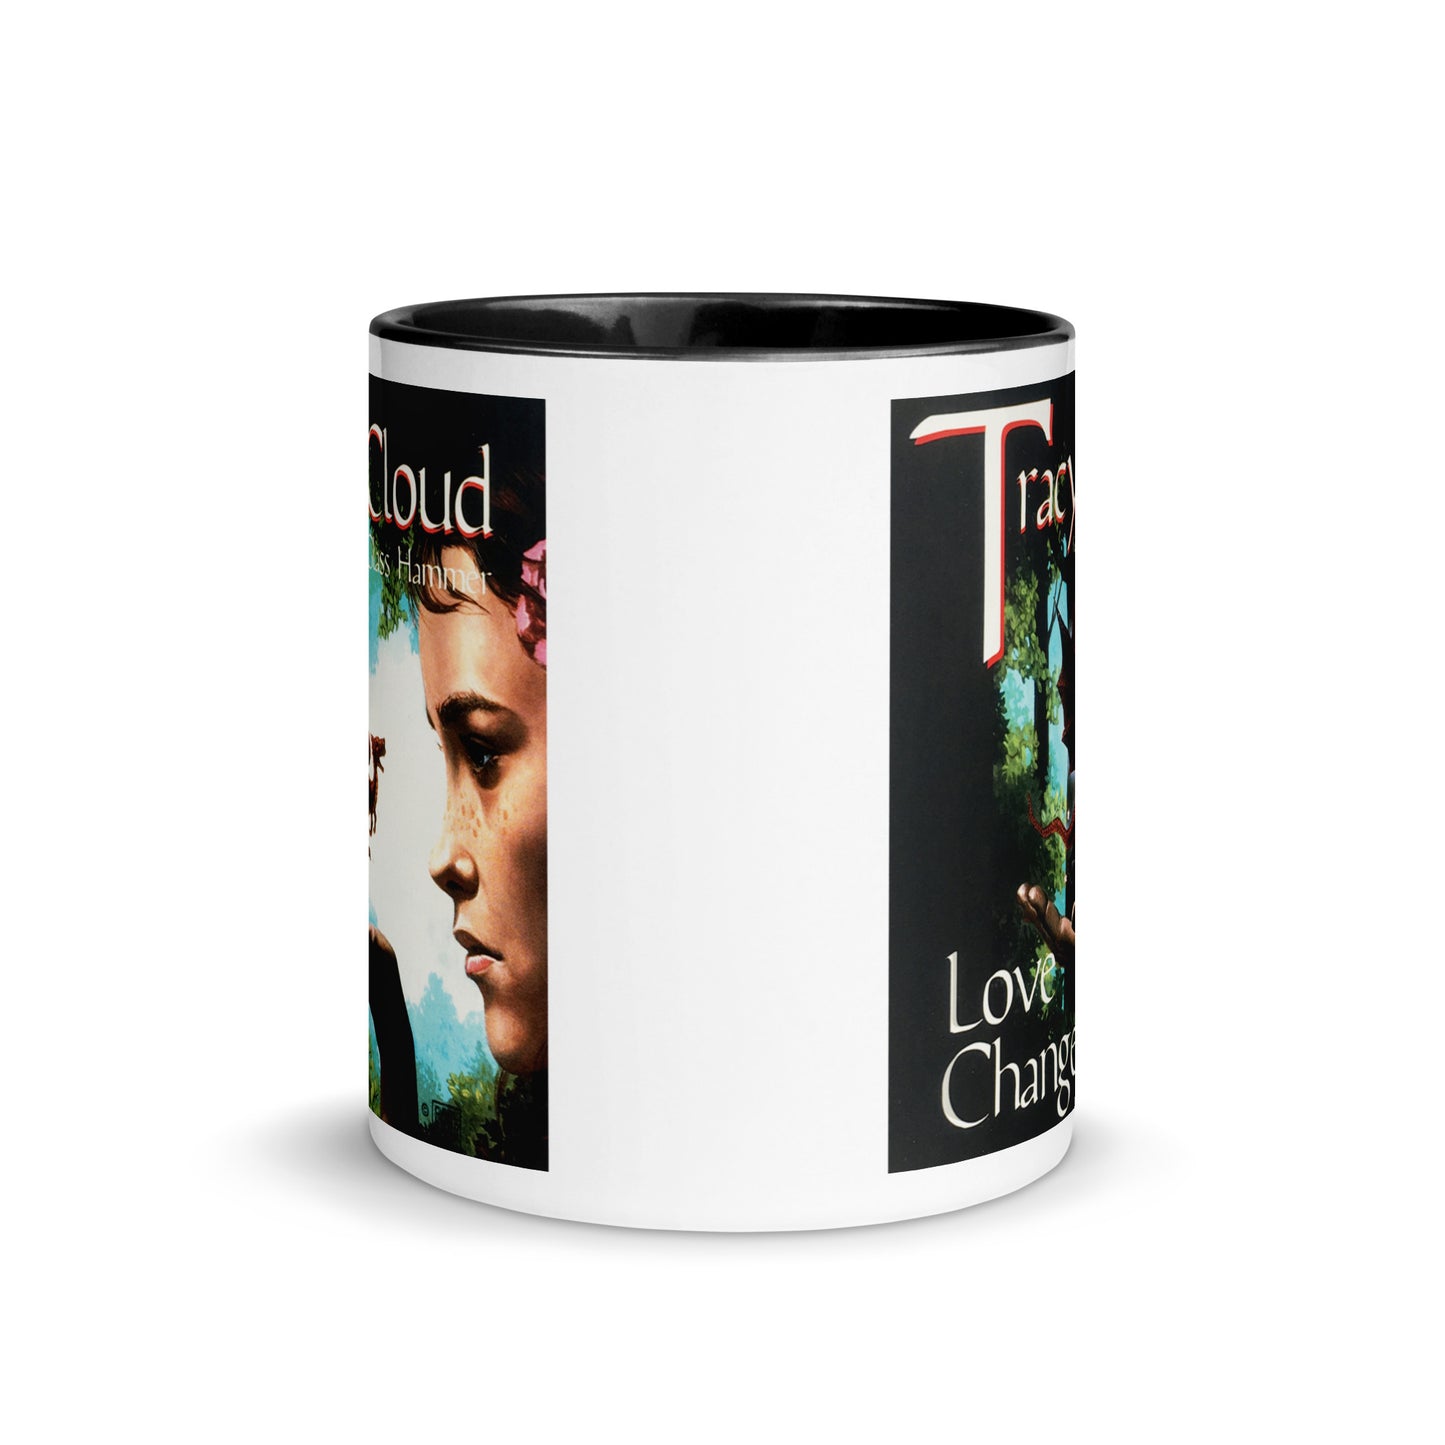 Tracy Cloud - Love Changes Mug With Color Inside